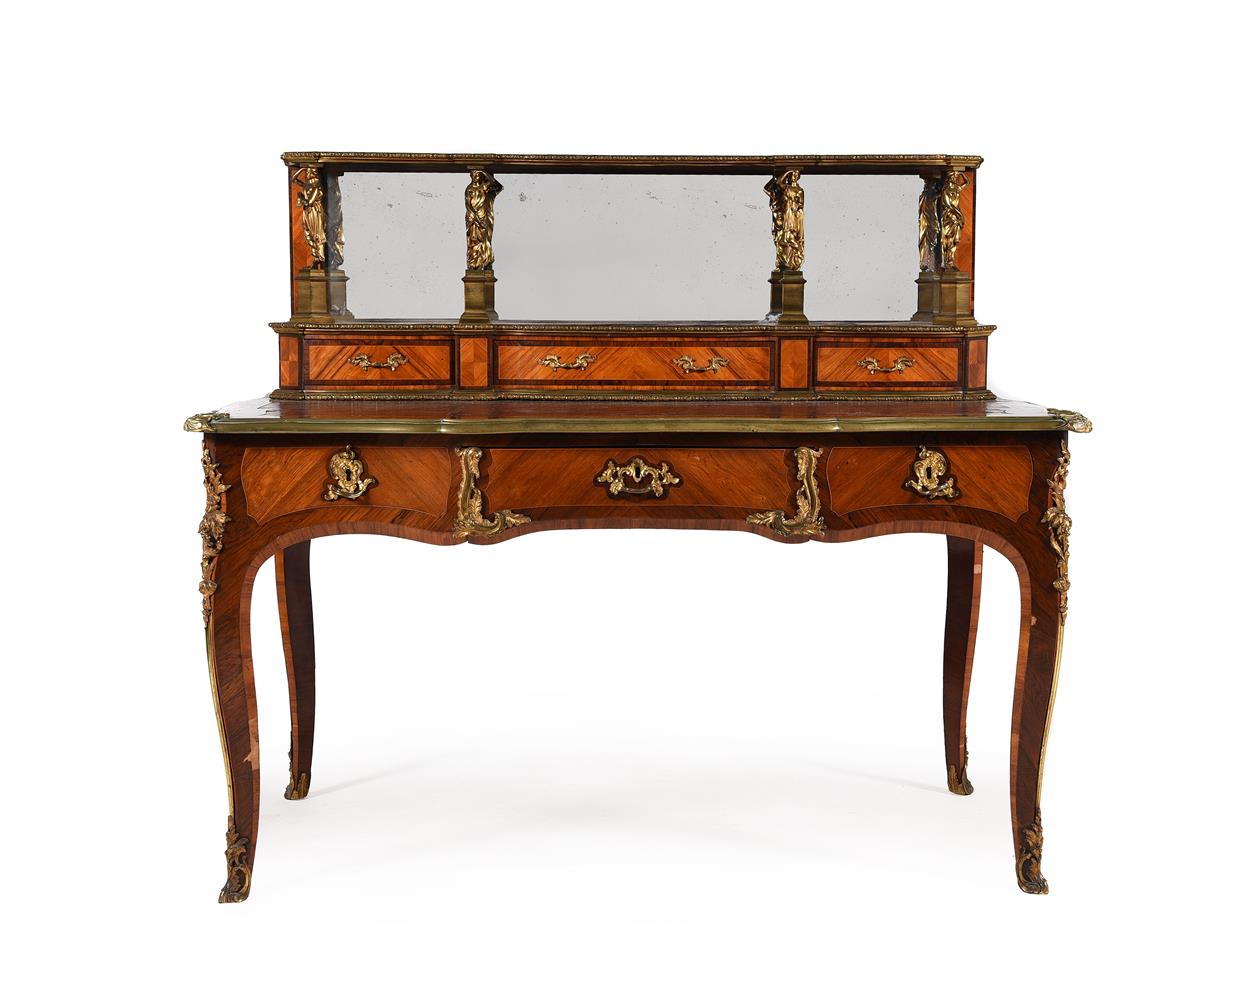 Y A VICTORIAN KINGWOOD, ROSEWOOD AND GILT METAL MOUNTED BUREAU PLAT, SECOND HALF 19TH CENTURY